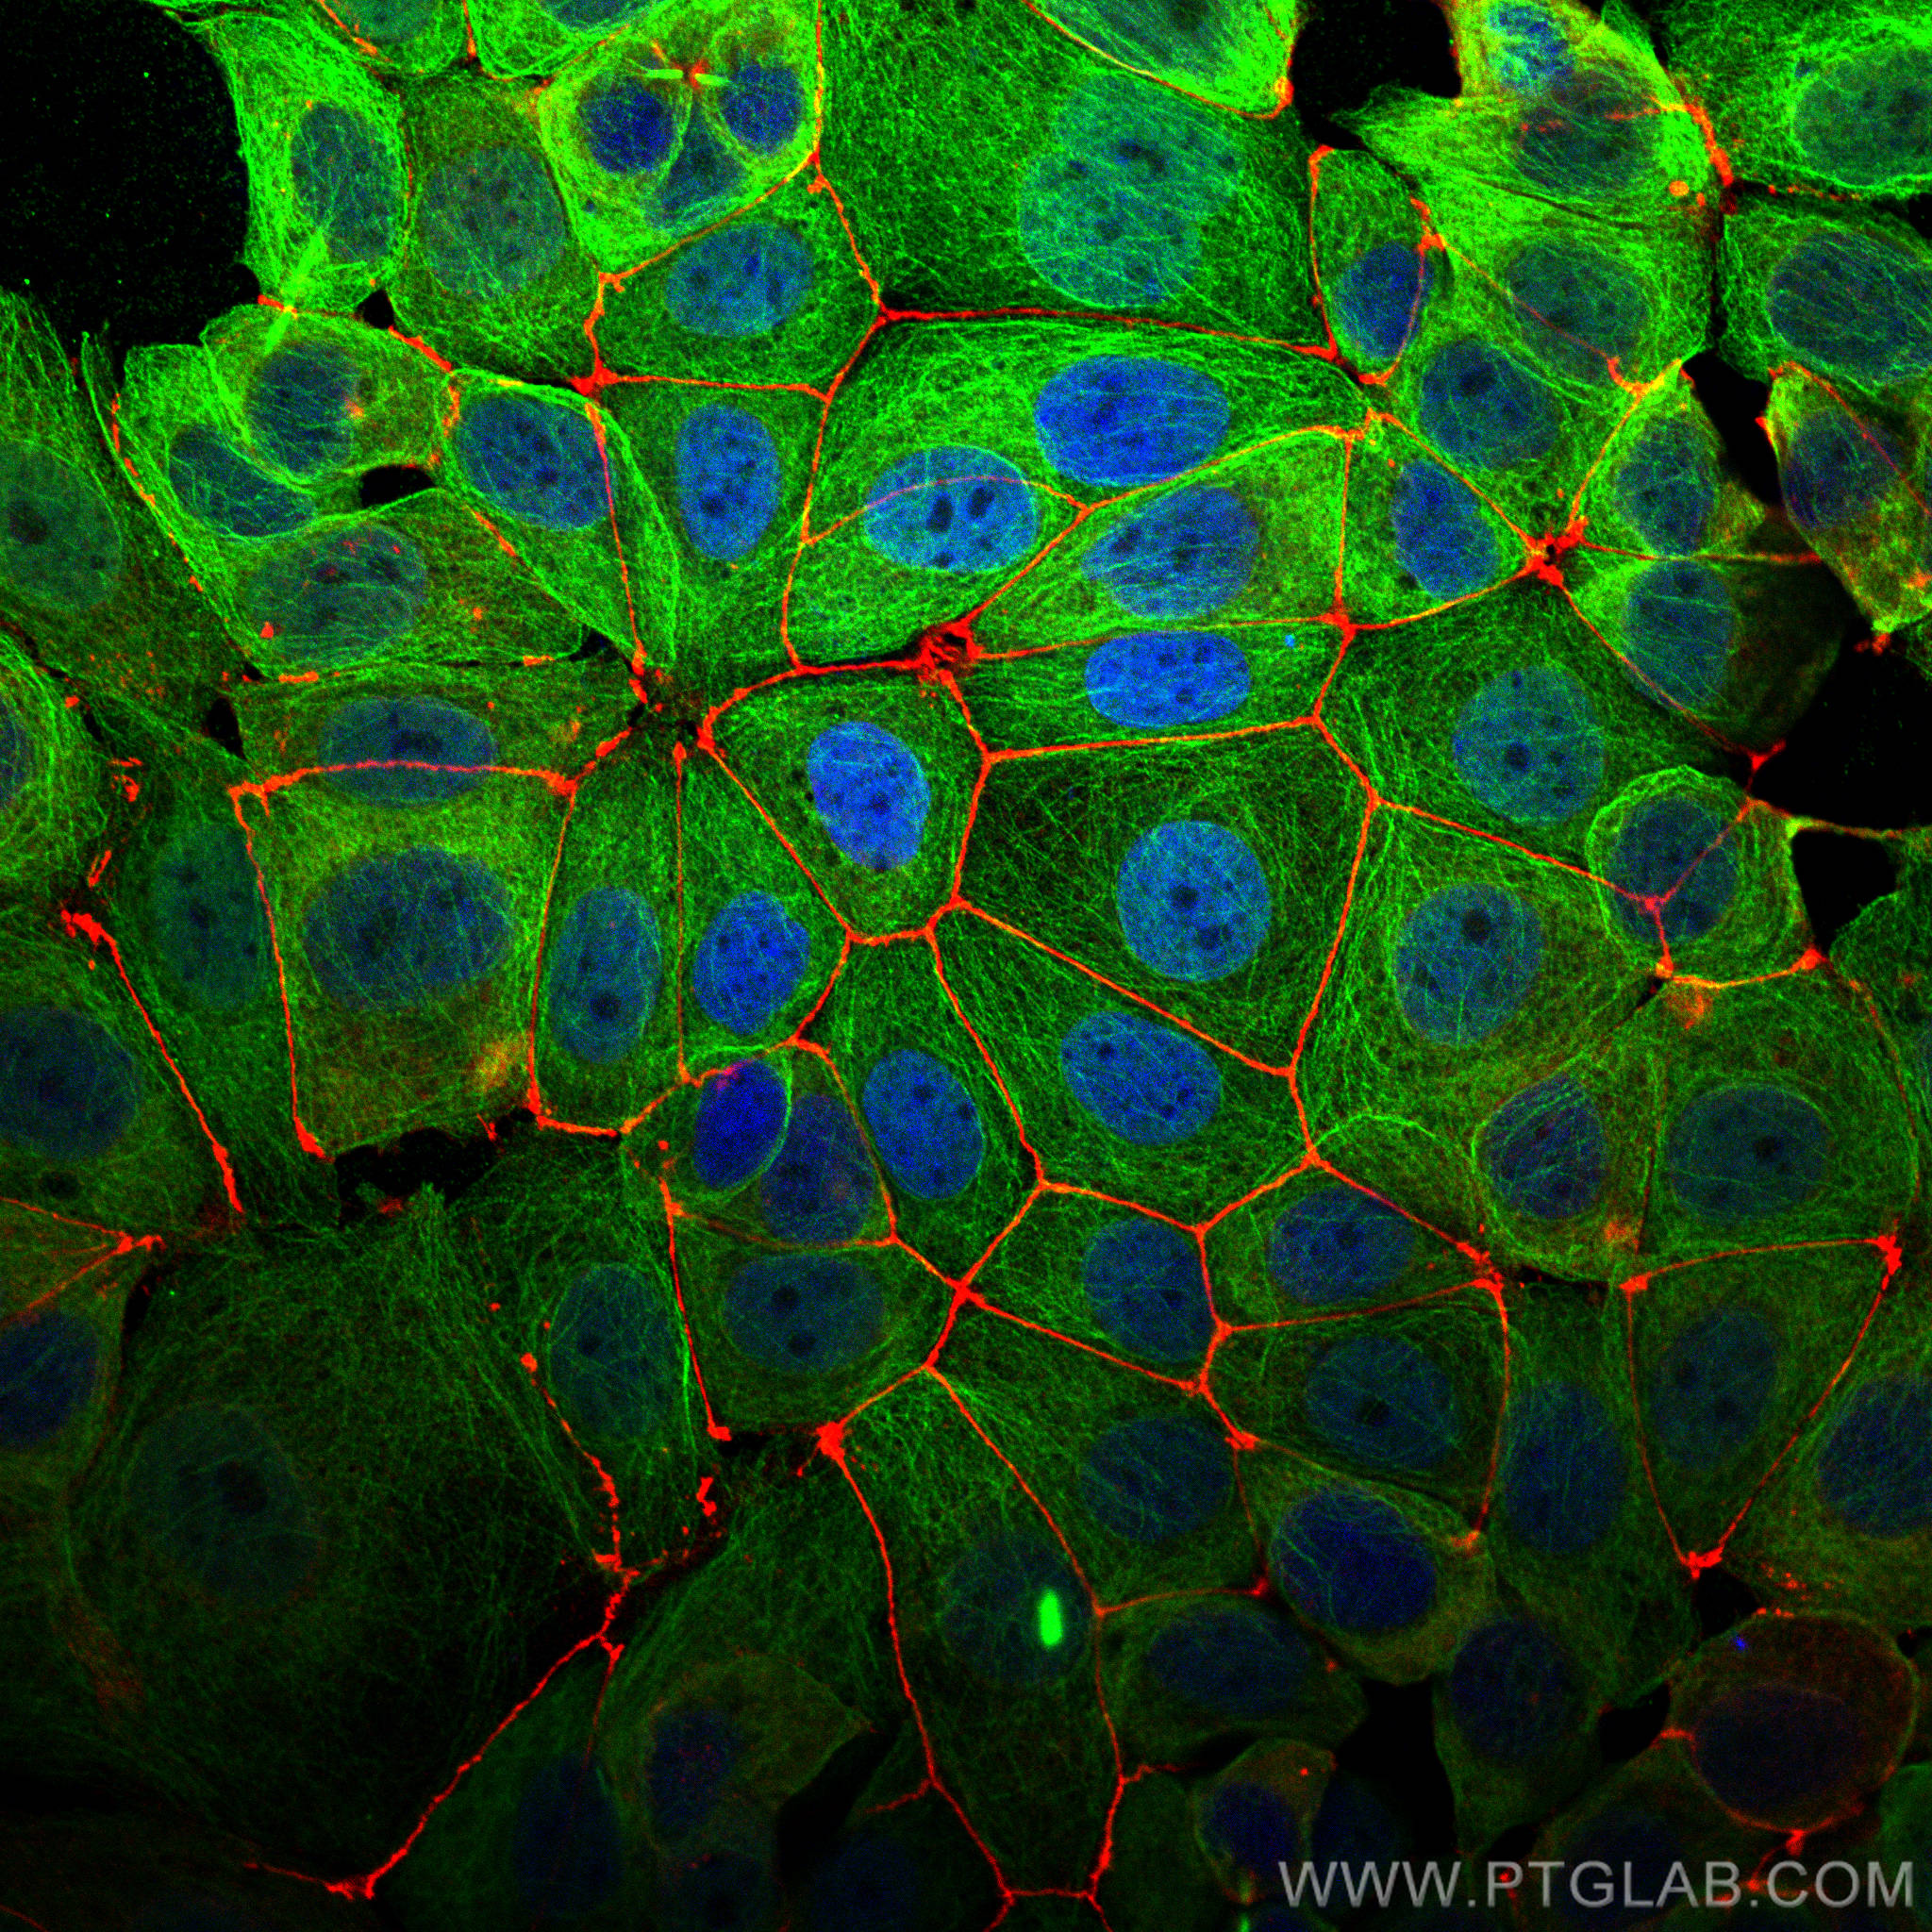 Immunofluorescence of MCF-7 cells: MCF-7 cells were fixed with 4% PFA and stained with Rabbit anti-ZO1 polyclonal antibody (21773-1-AP, 1:2000, red) and mouse anti-Alpha Tubulin monoclonal antibody (66031-1-Ig, 1:1000, green). Multi-rAb CoraLite® Plus 594-Goat Anti-Rabbit Recombinant Secondary Antibody (H+L) (RGAR004, 1:500) and Multi-rAb CoraLite® Plus 488-Goat Anti-Mouse Recombinant Secondary Antibody (H+L) (RGAM002, 1:500) were used for detection.